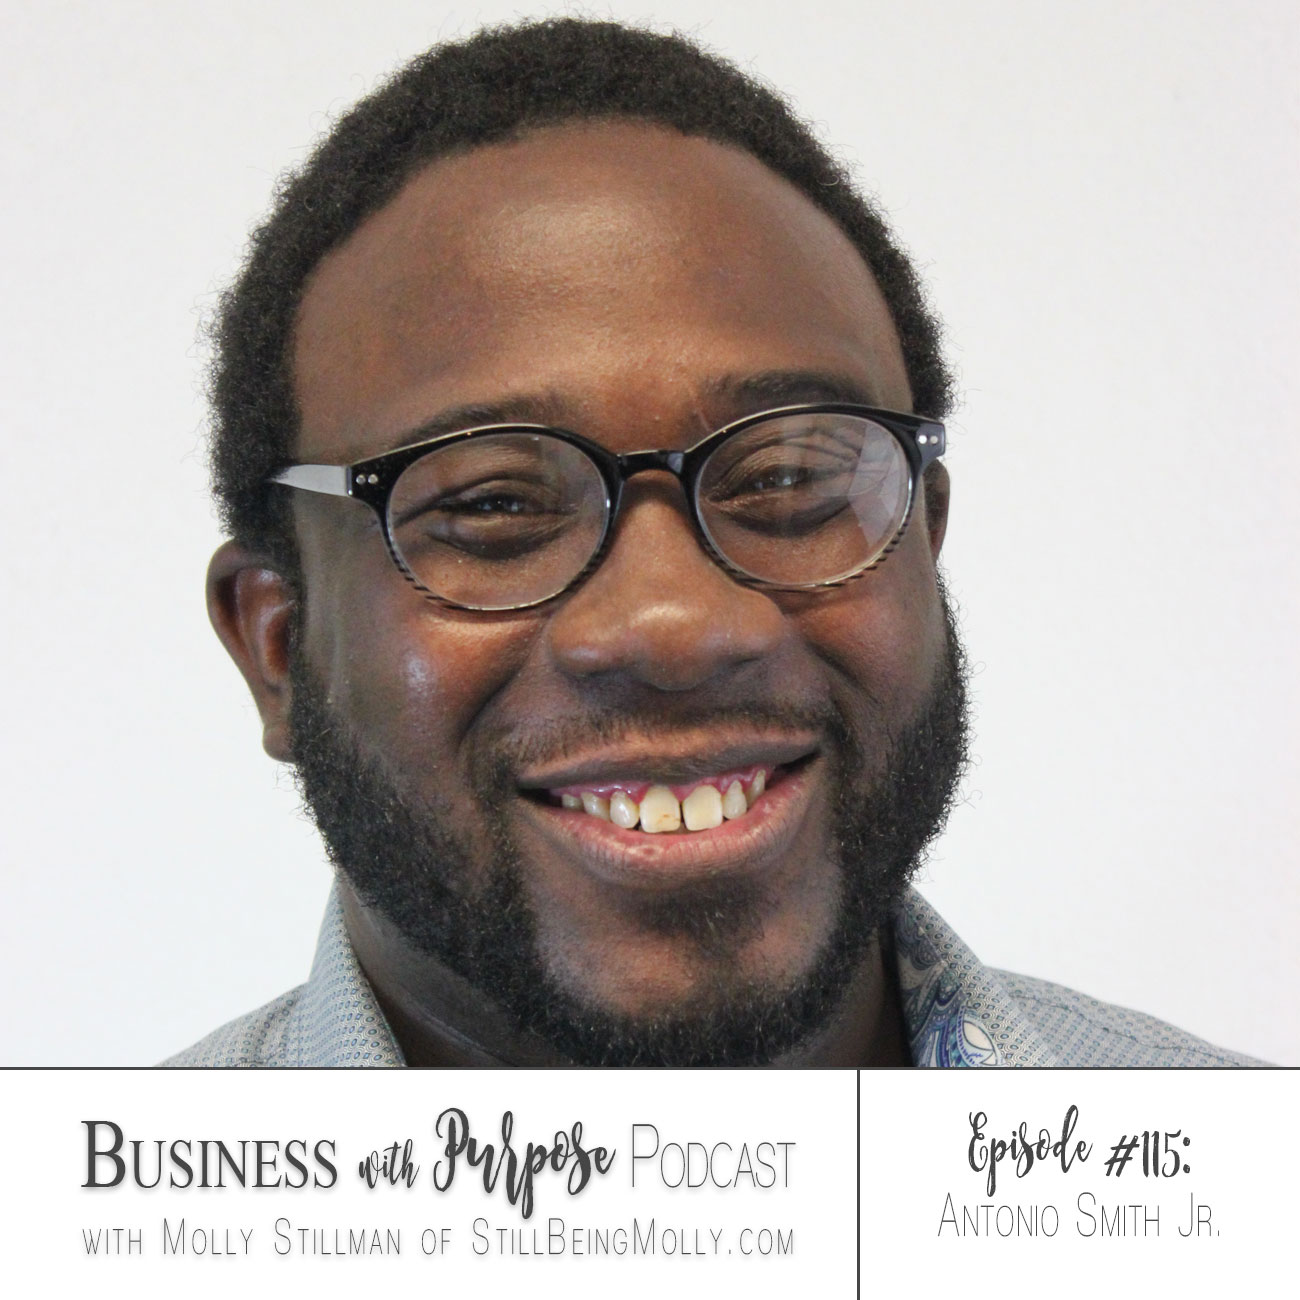 Business with Purpose Podcast EP 115: Antonio T. Smith Jr. - From Living in a Dumpster to Self-Made Millionaire